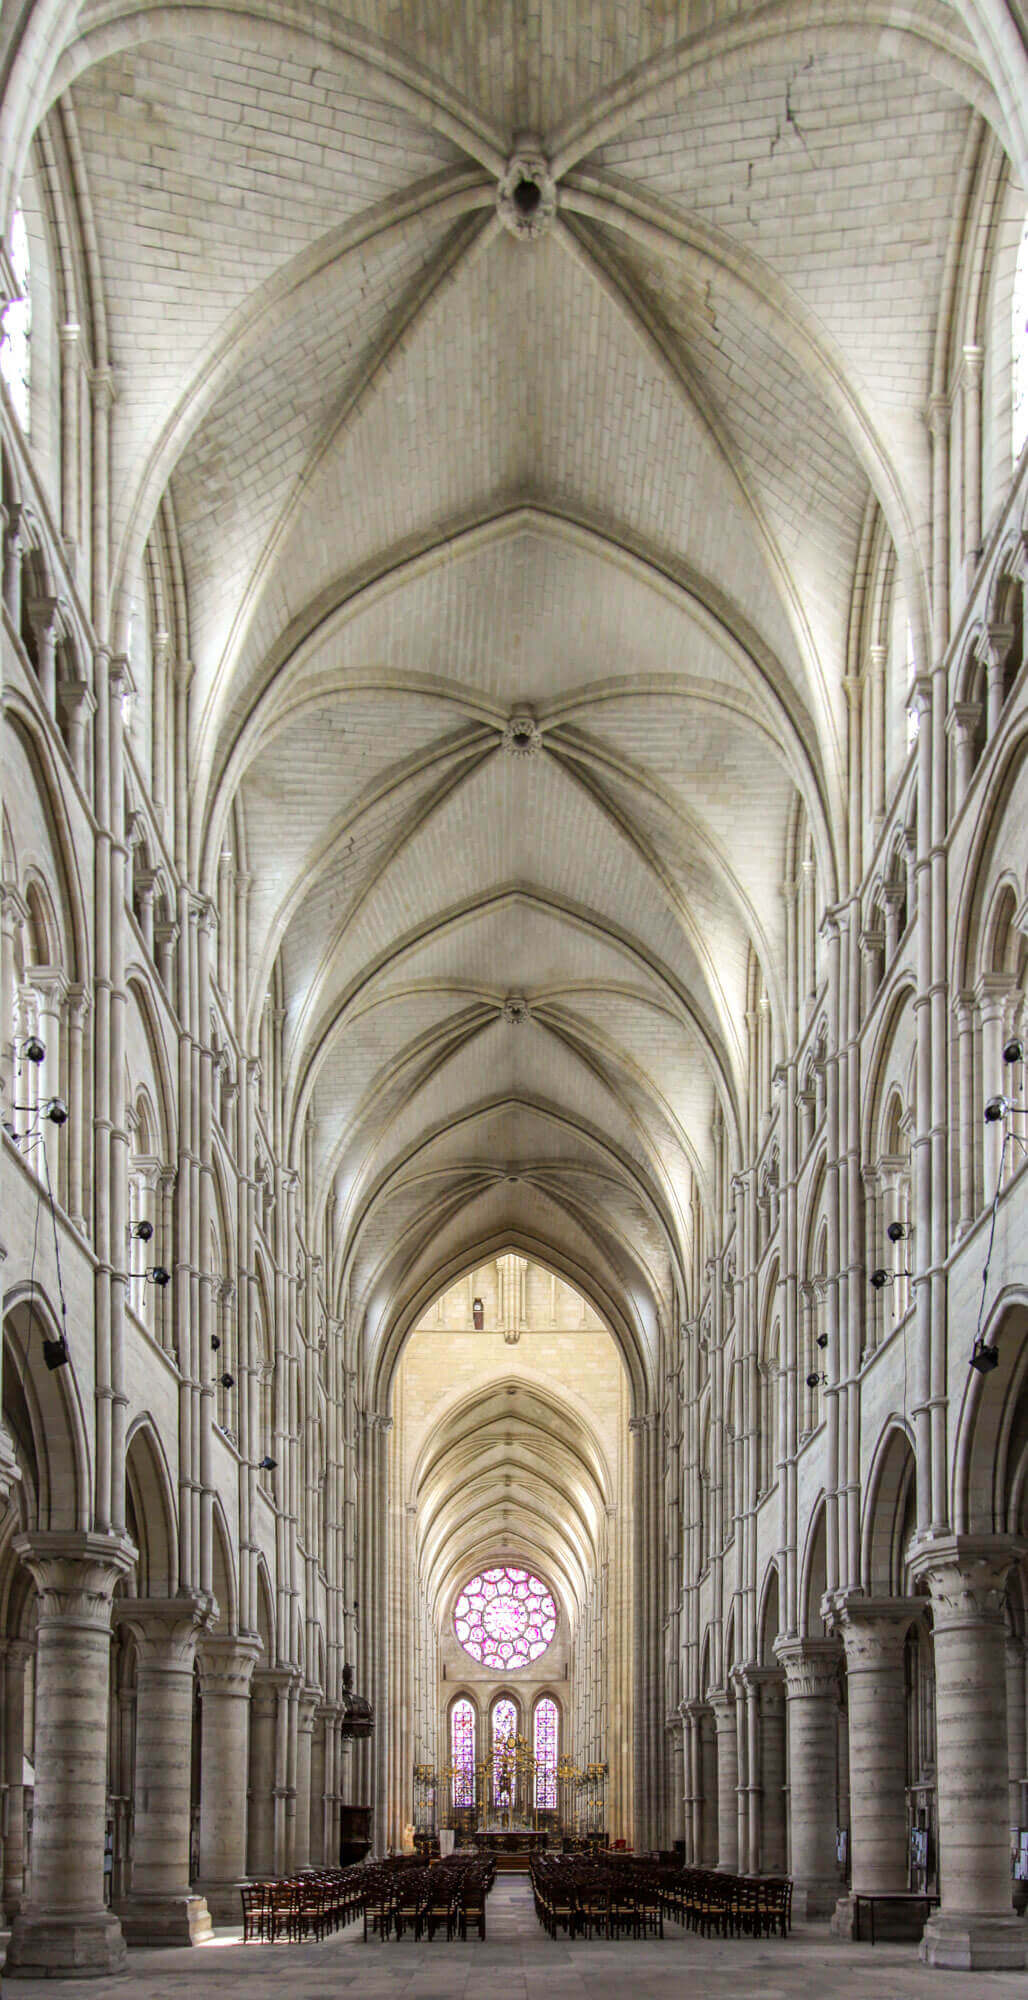 The Gothic interior of the Laon Cathedral